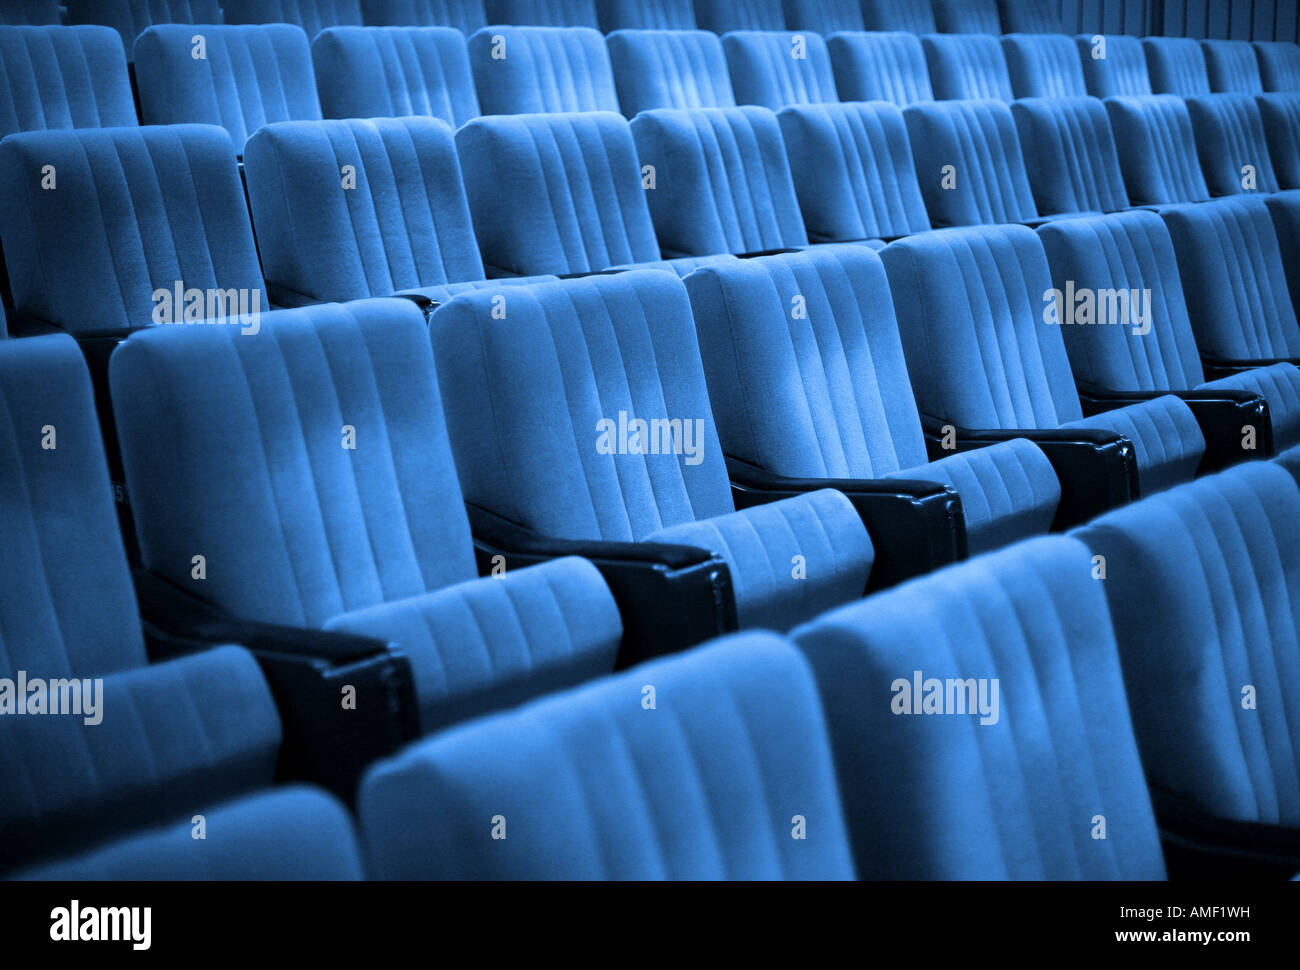 Empty chairs at cinema or theater. Blue tone. Stock Photo